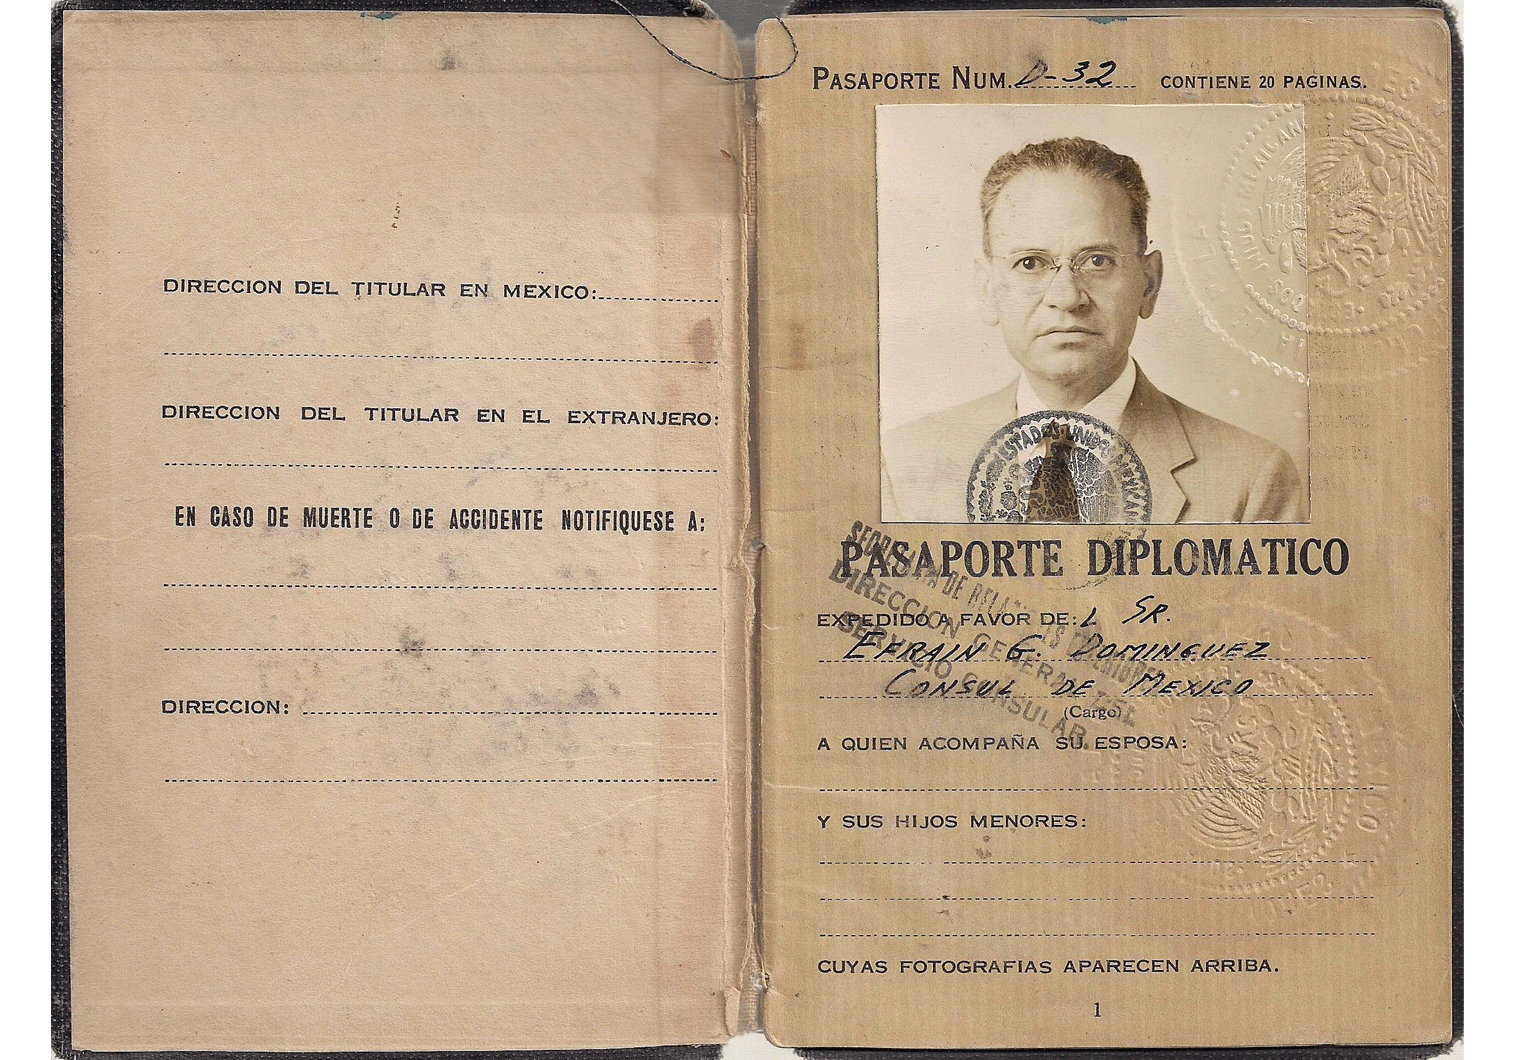 Mexican diplomatic passport